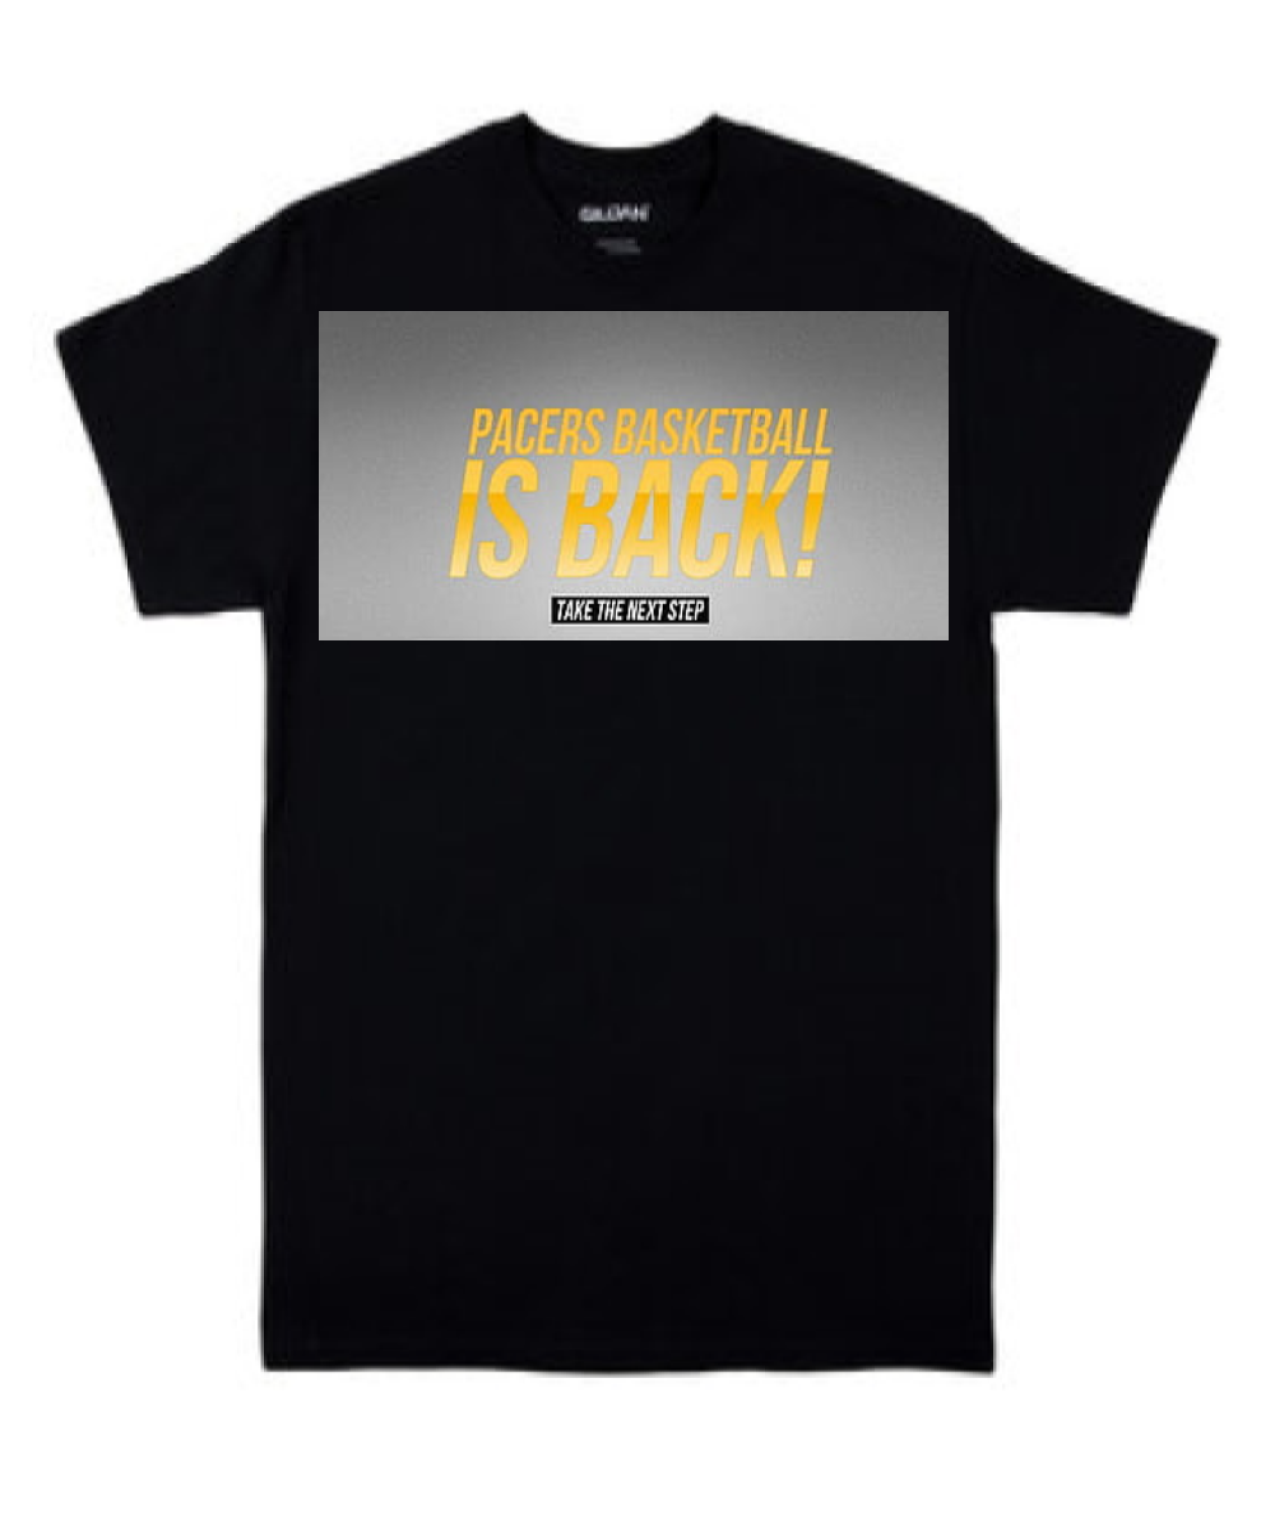 Indy Pacers Basketball Adult & Youth T-shirts